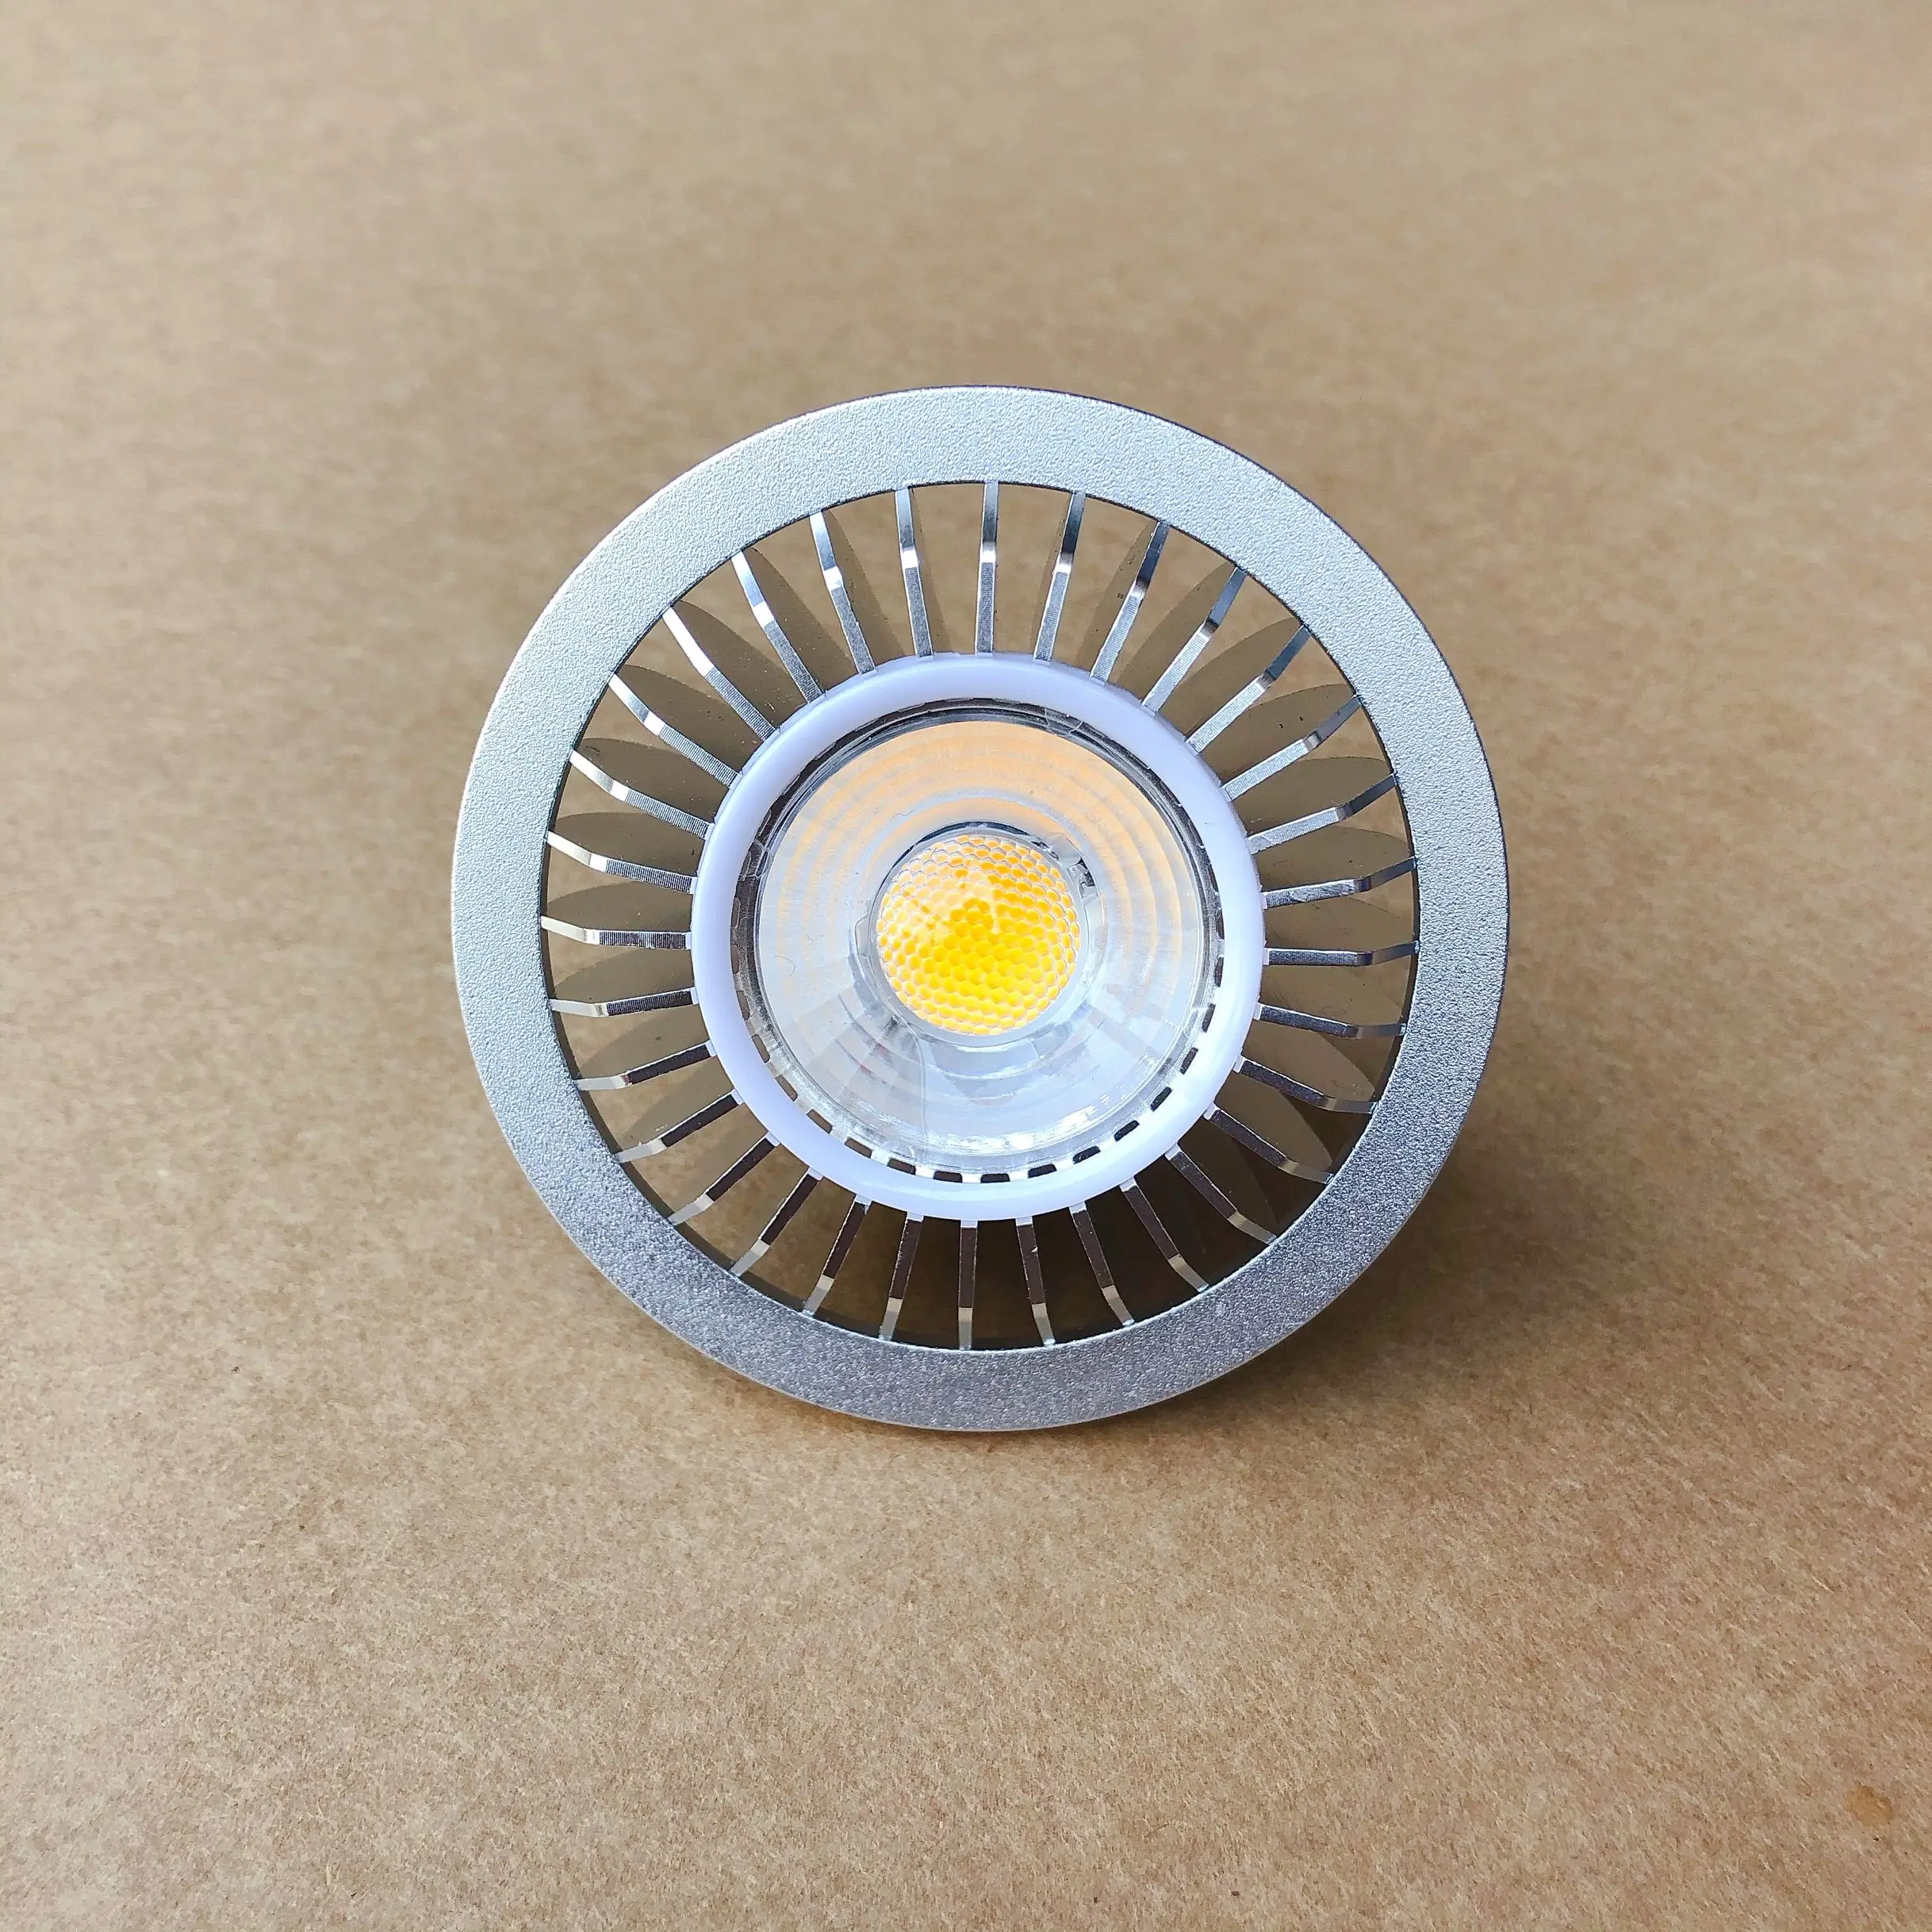 1pcs AC85-265V/DC12V 7W AR70 B15D LED Spotlight BA15D AR70 LED Bulb Light Recessed Ceiling Lamps for Home Commercial Lighting